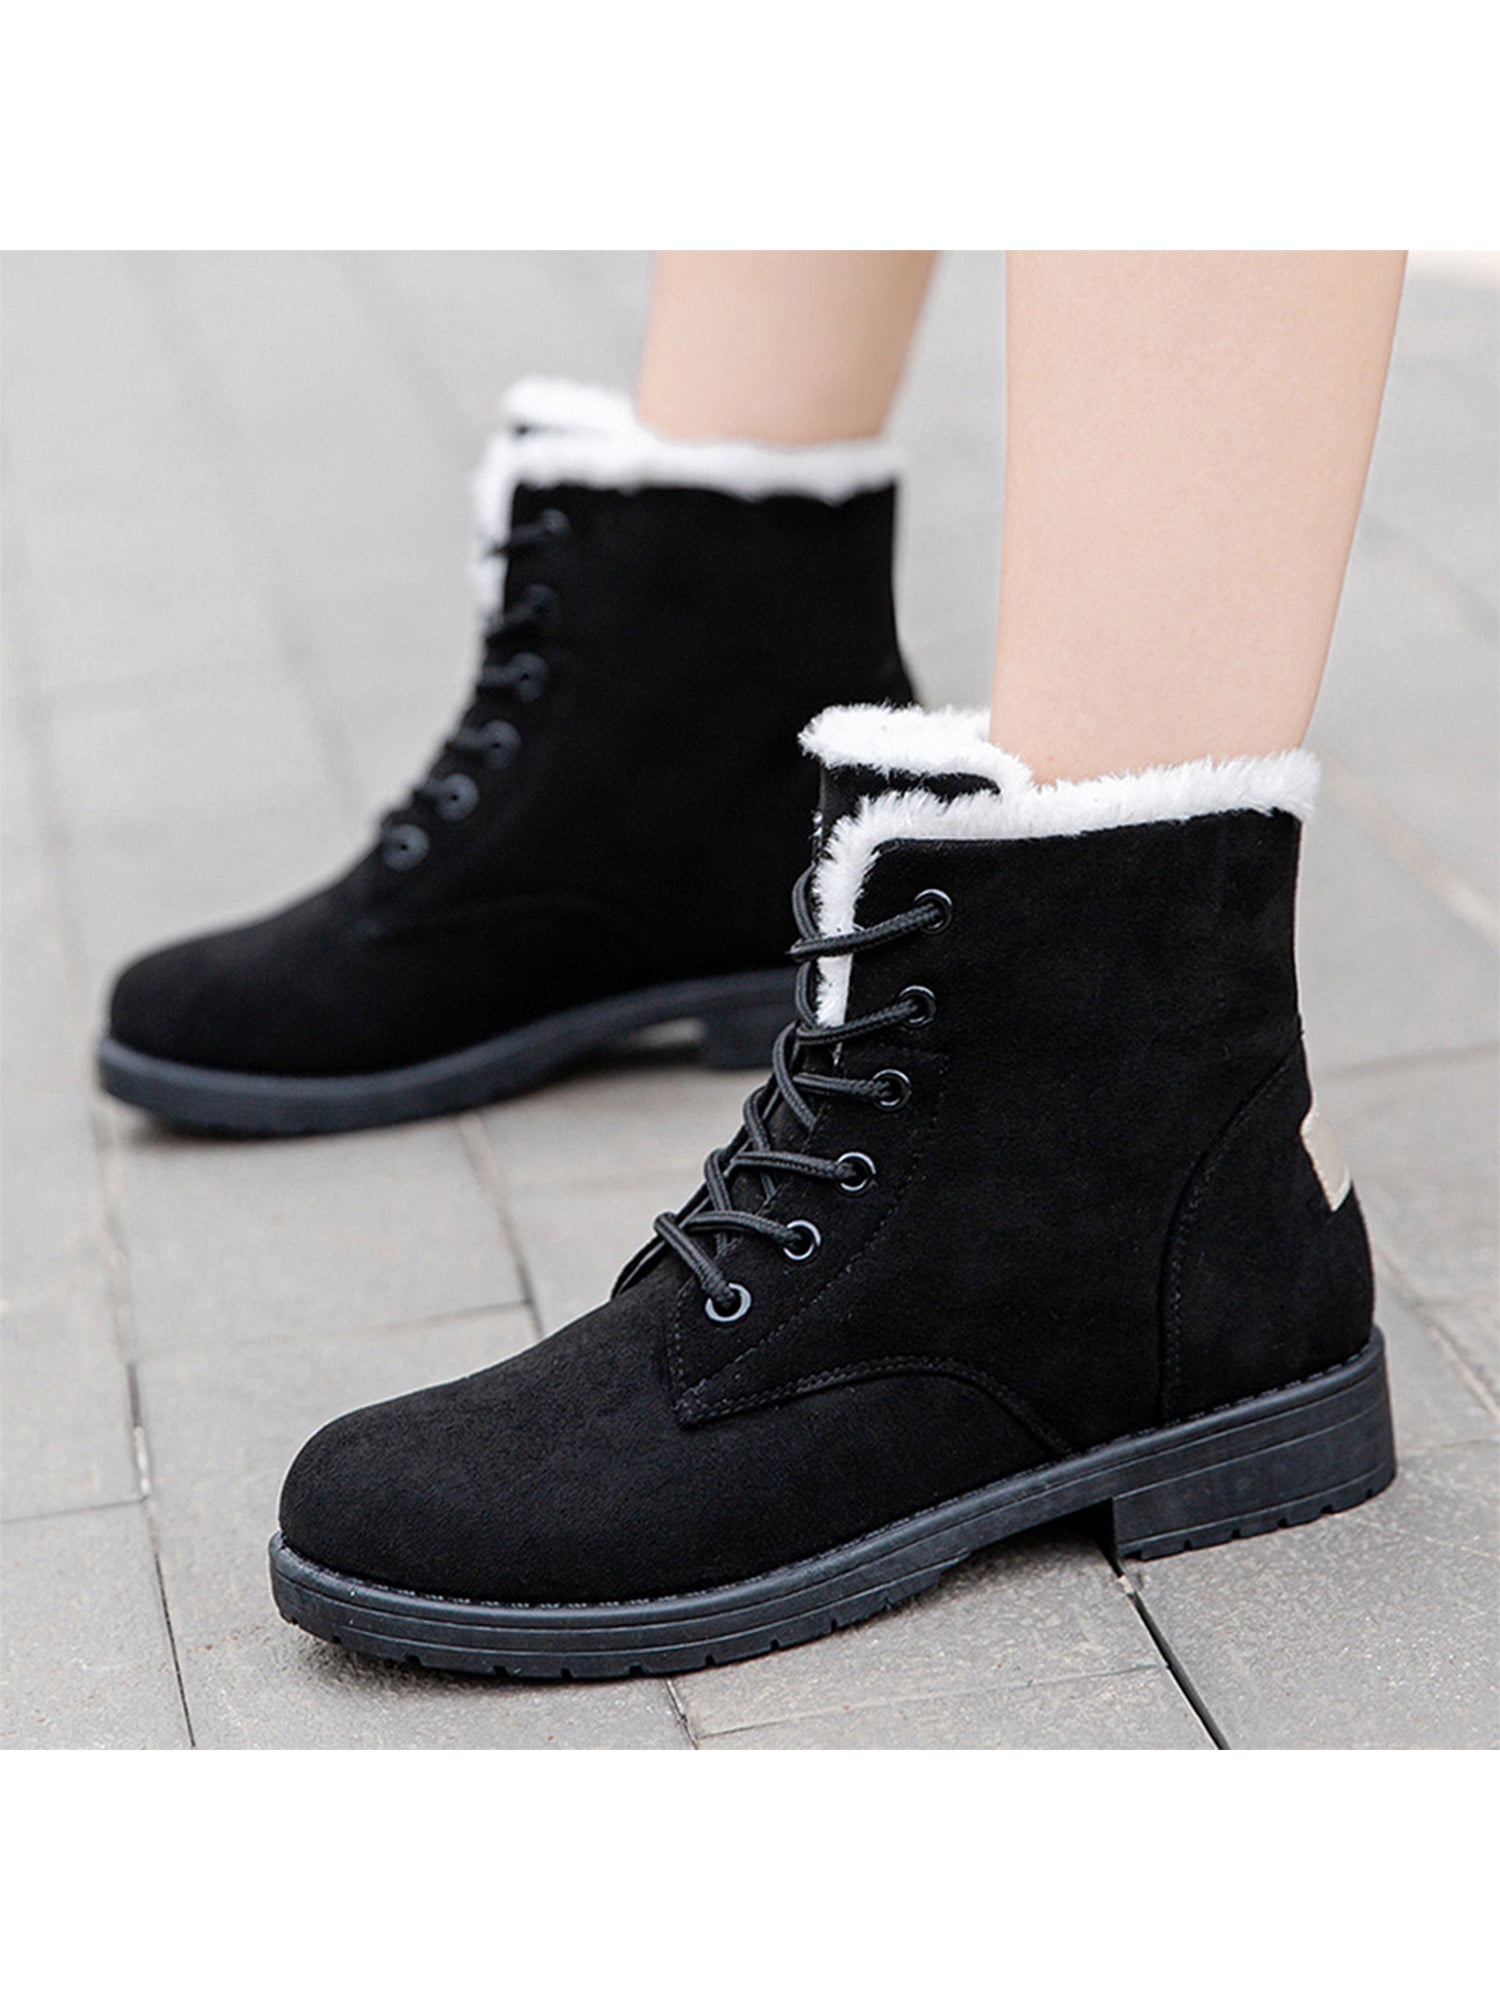 New Womens Ladies Winter Warm Fur Lined Flat Lace Up Snow Ankle Boots Shoes